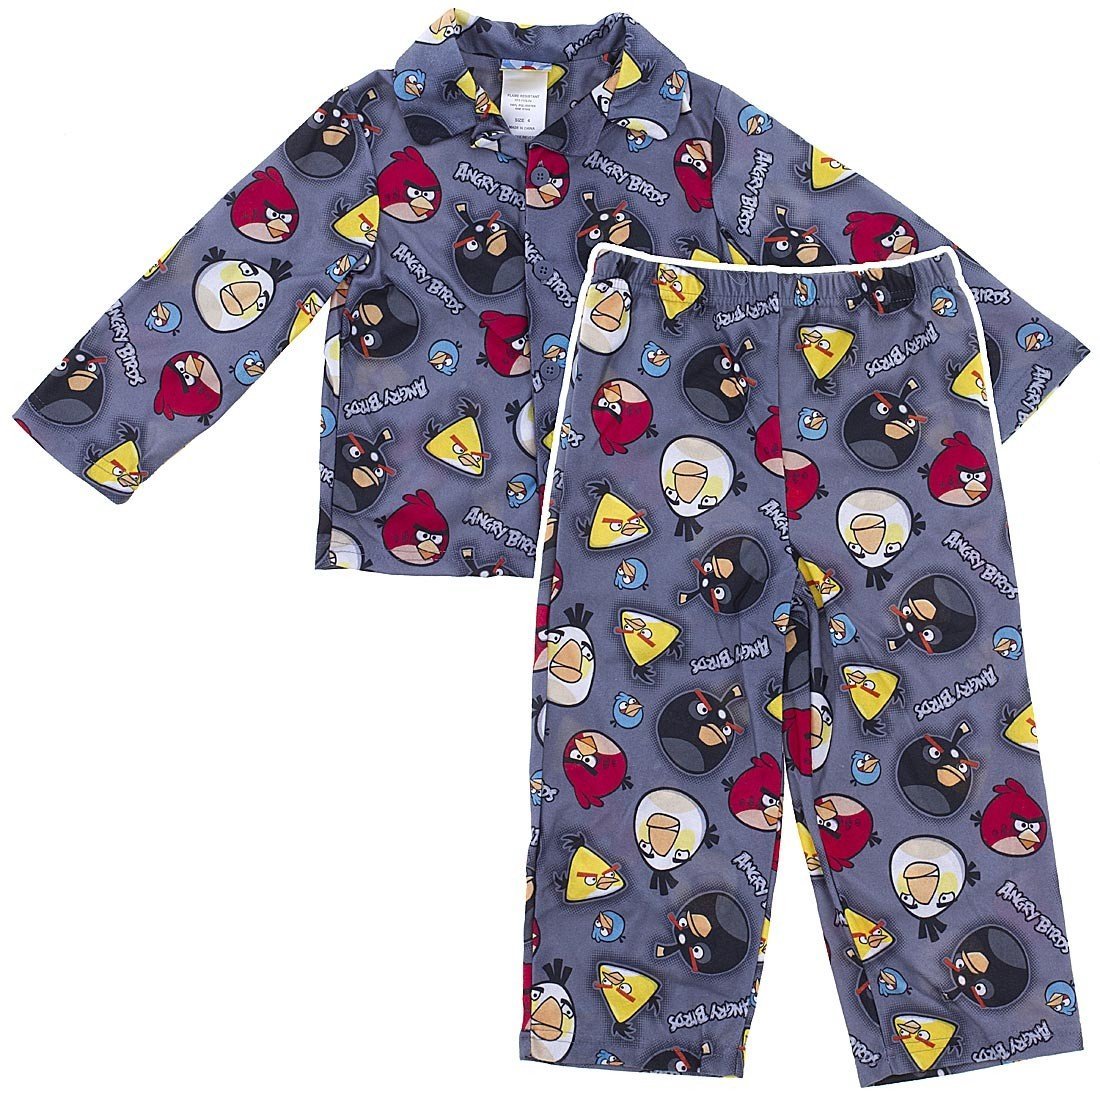 HOT Gift Item: Angry Birds Pajamas, Shirts, Hats, & Accessories